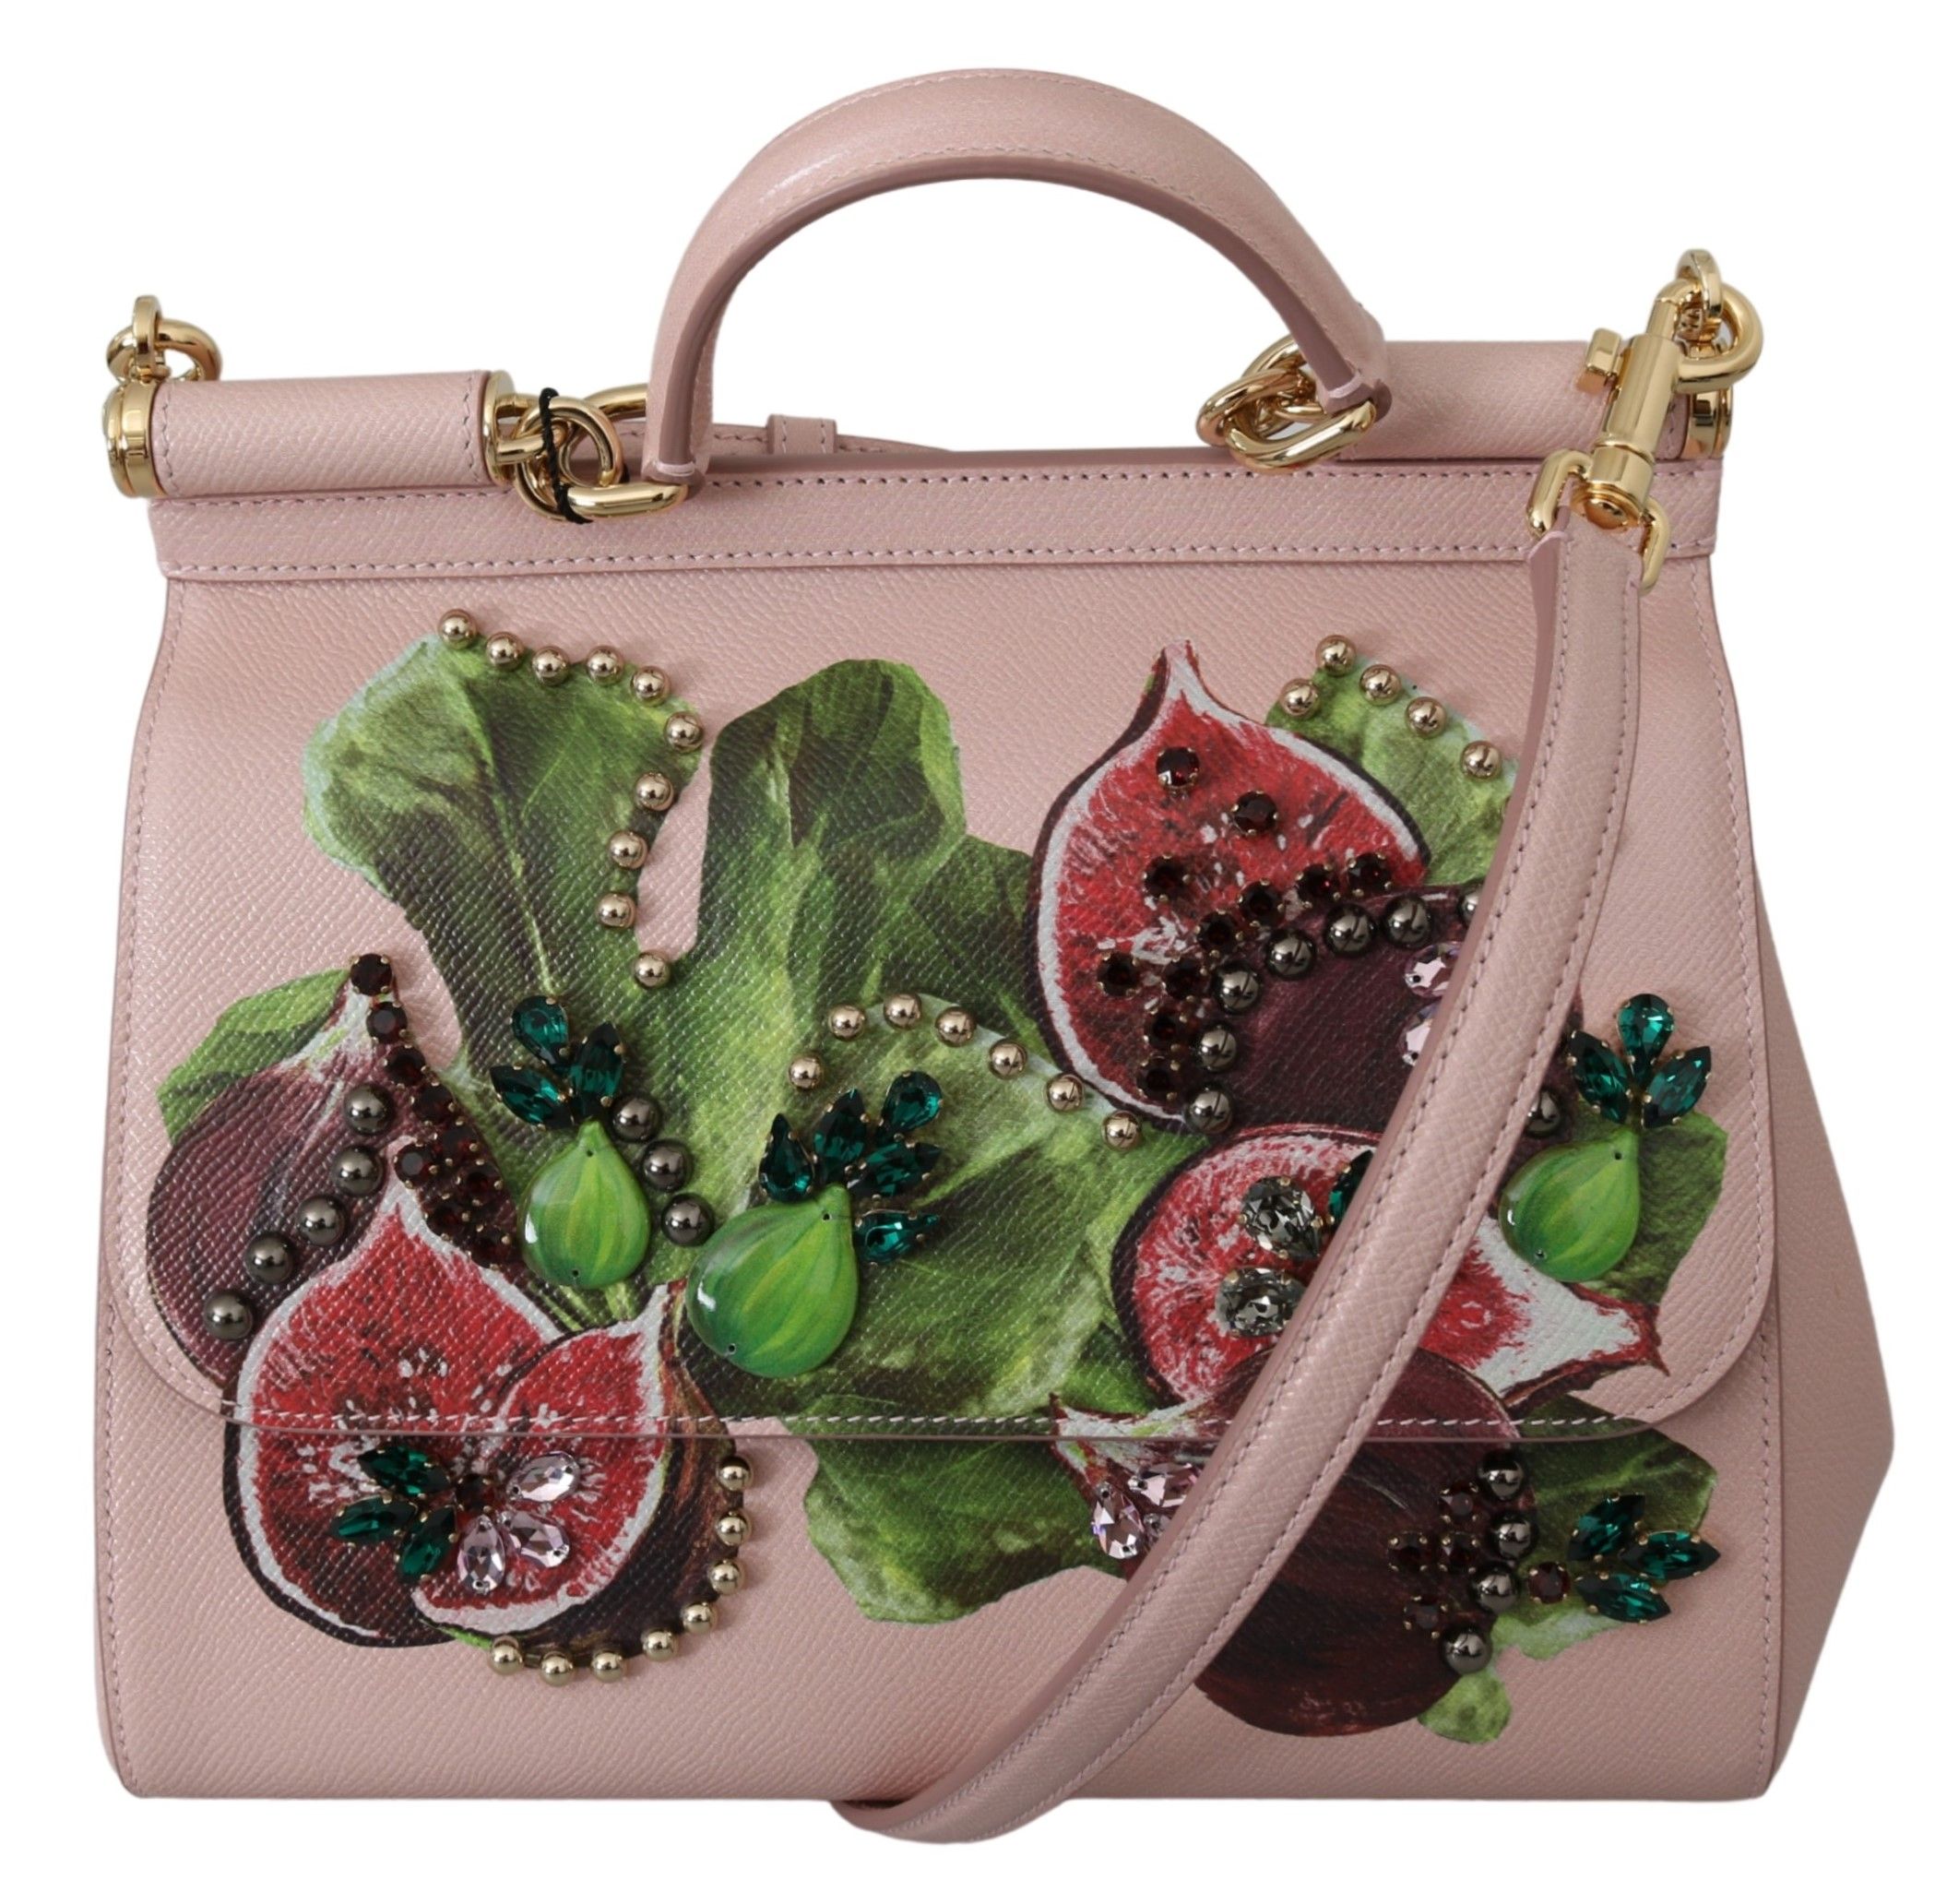 DOLCE & GABBANA. 
Gorgeous brand new with tags, 100% Authentic Dolce & Gabbana Women’s Bag.
Model: SICILY 
. 
Material: . Leather
Color: Pink Fruit Fig Print with gold metal detailing. 
Strap: One handle, one detachable and adjustable shoulder strap. 
Magnetic flap closure 
Inside pocket with zipper closure
Logo details, logo engraved metal hardware. 
Made in Italy. 
Very exclusive and very high craftsmanship. 
Measurements: . 25cm x 20cm x 12cm
Strap: . 110cm x 1cm